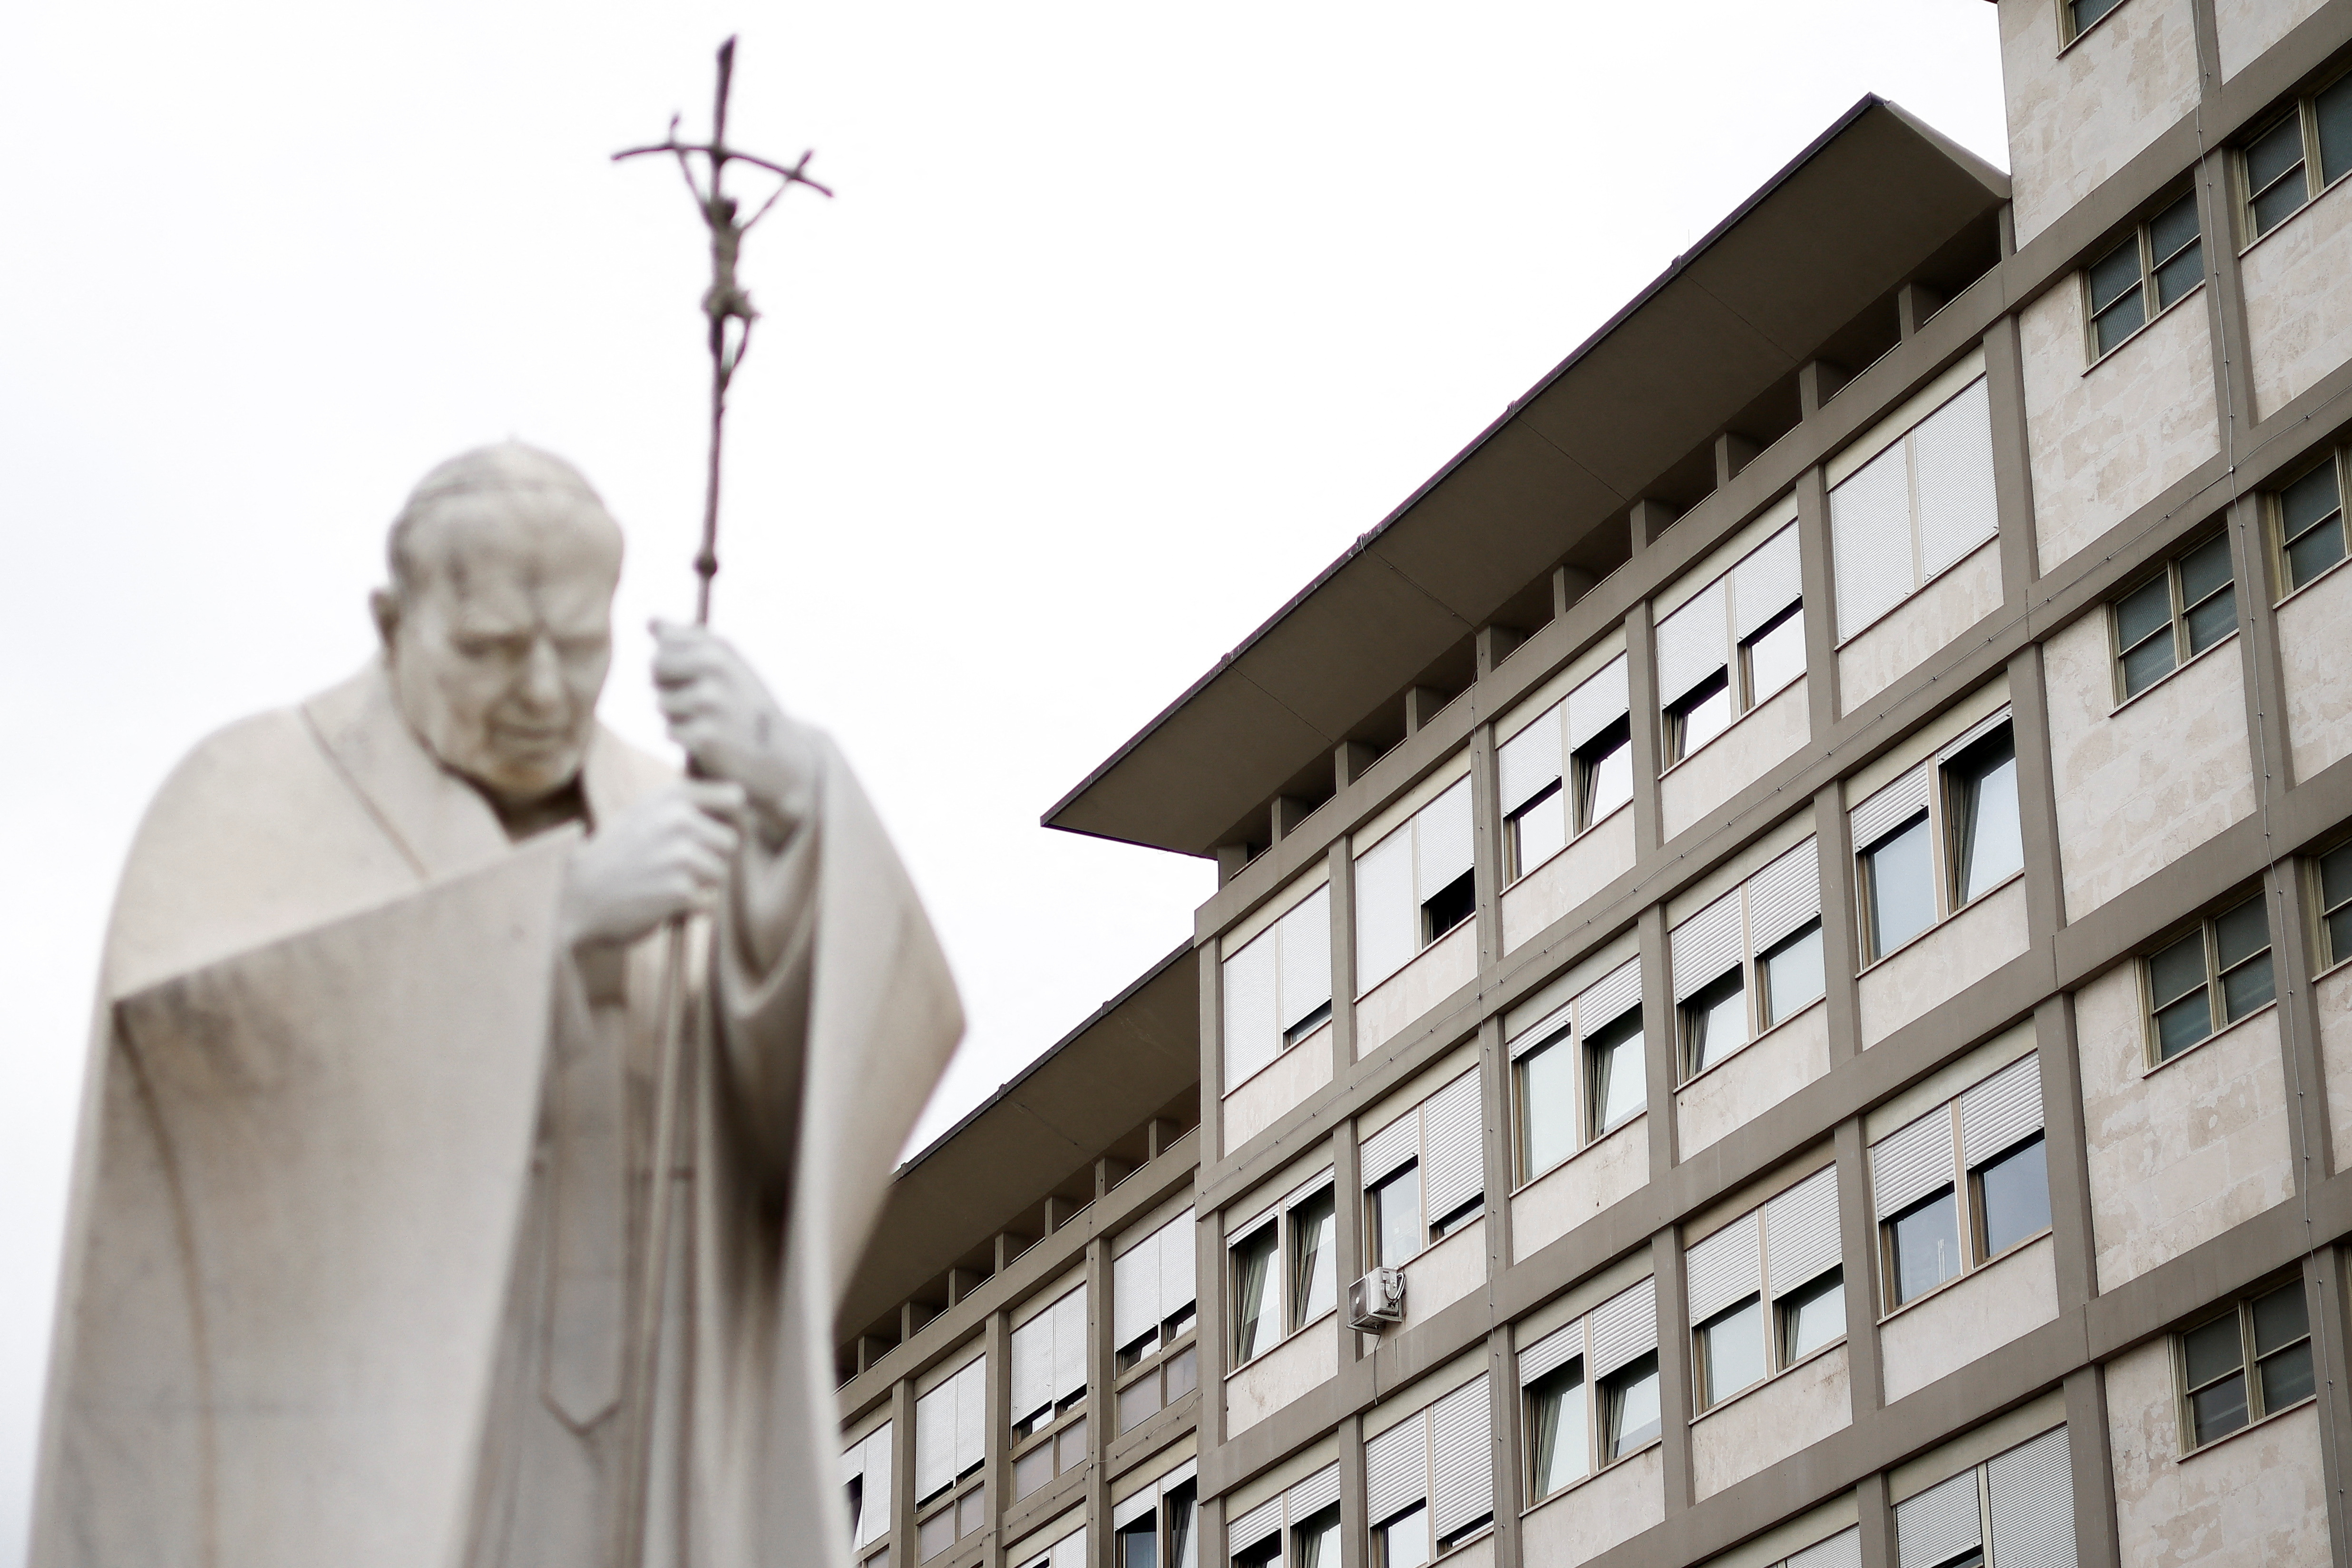 A statue of former Pope John Paul II is seen in the courtyard of the Gemelli Hospital, where Pope Francis is hospitalised for a respiratory infection, in Rome, Italy March 31, 2023. REUTERS/Guglielmo Mangiapane